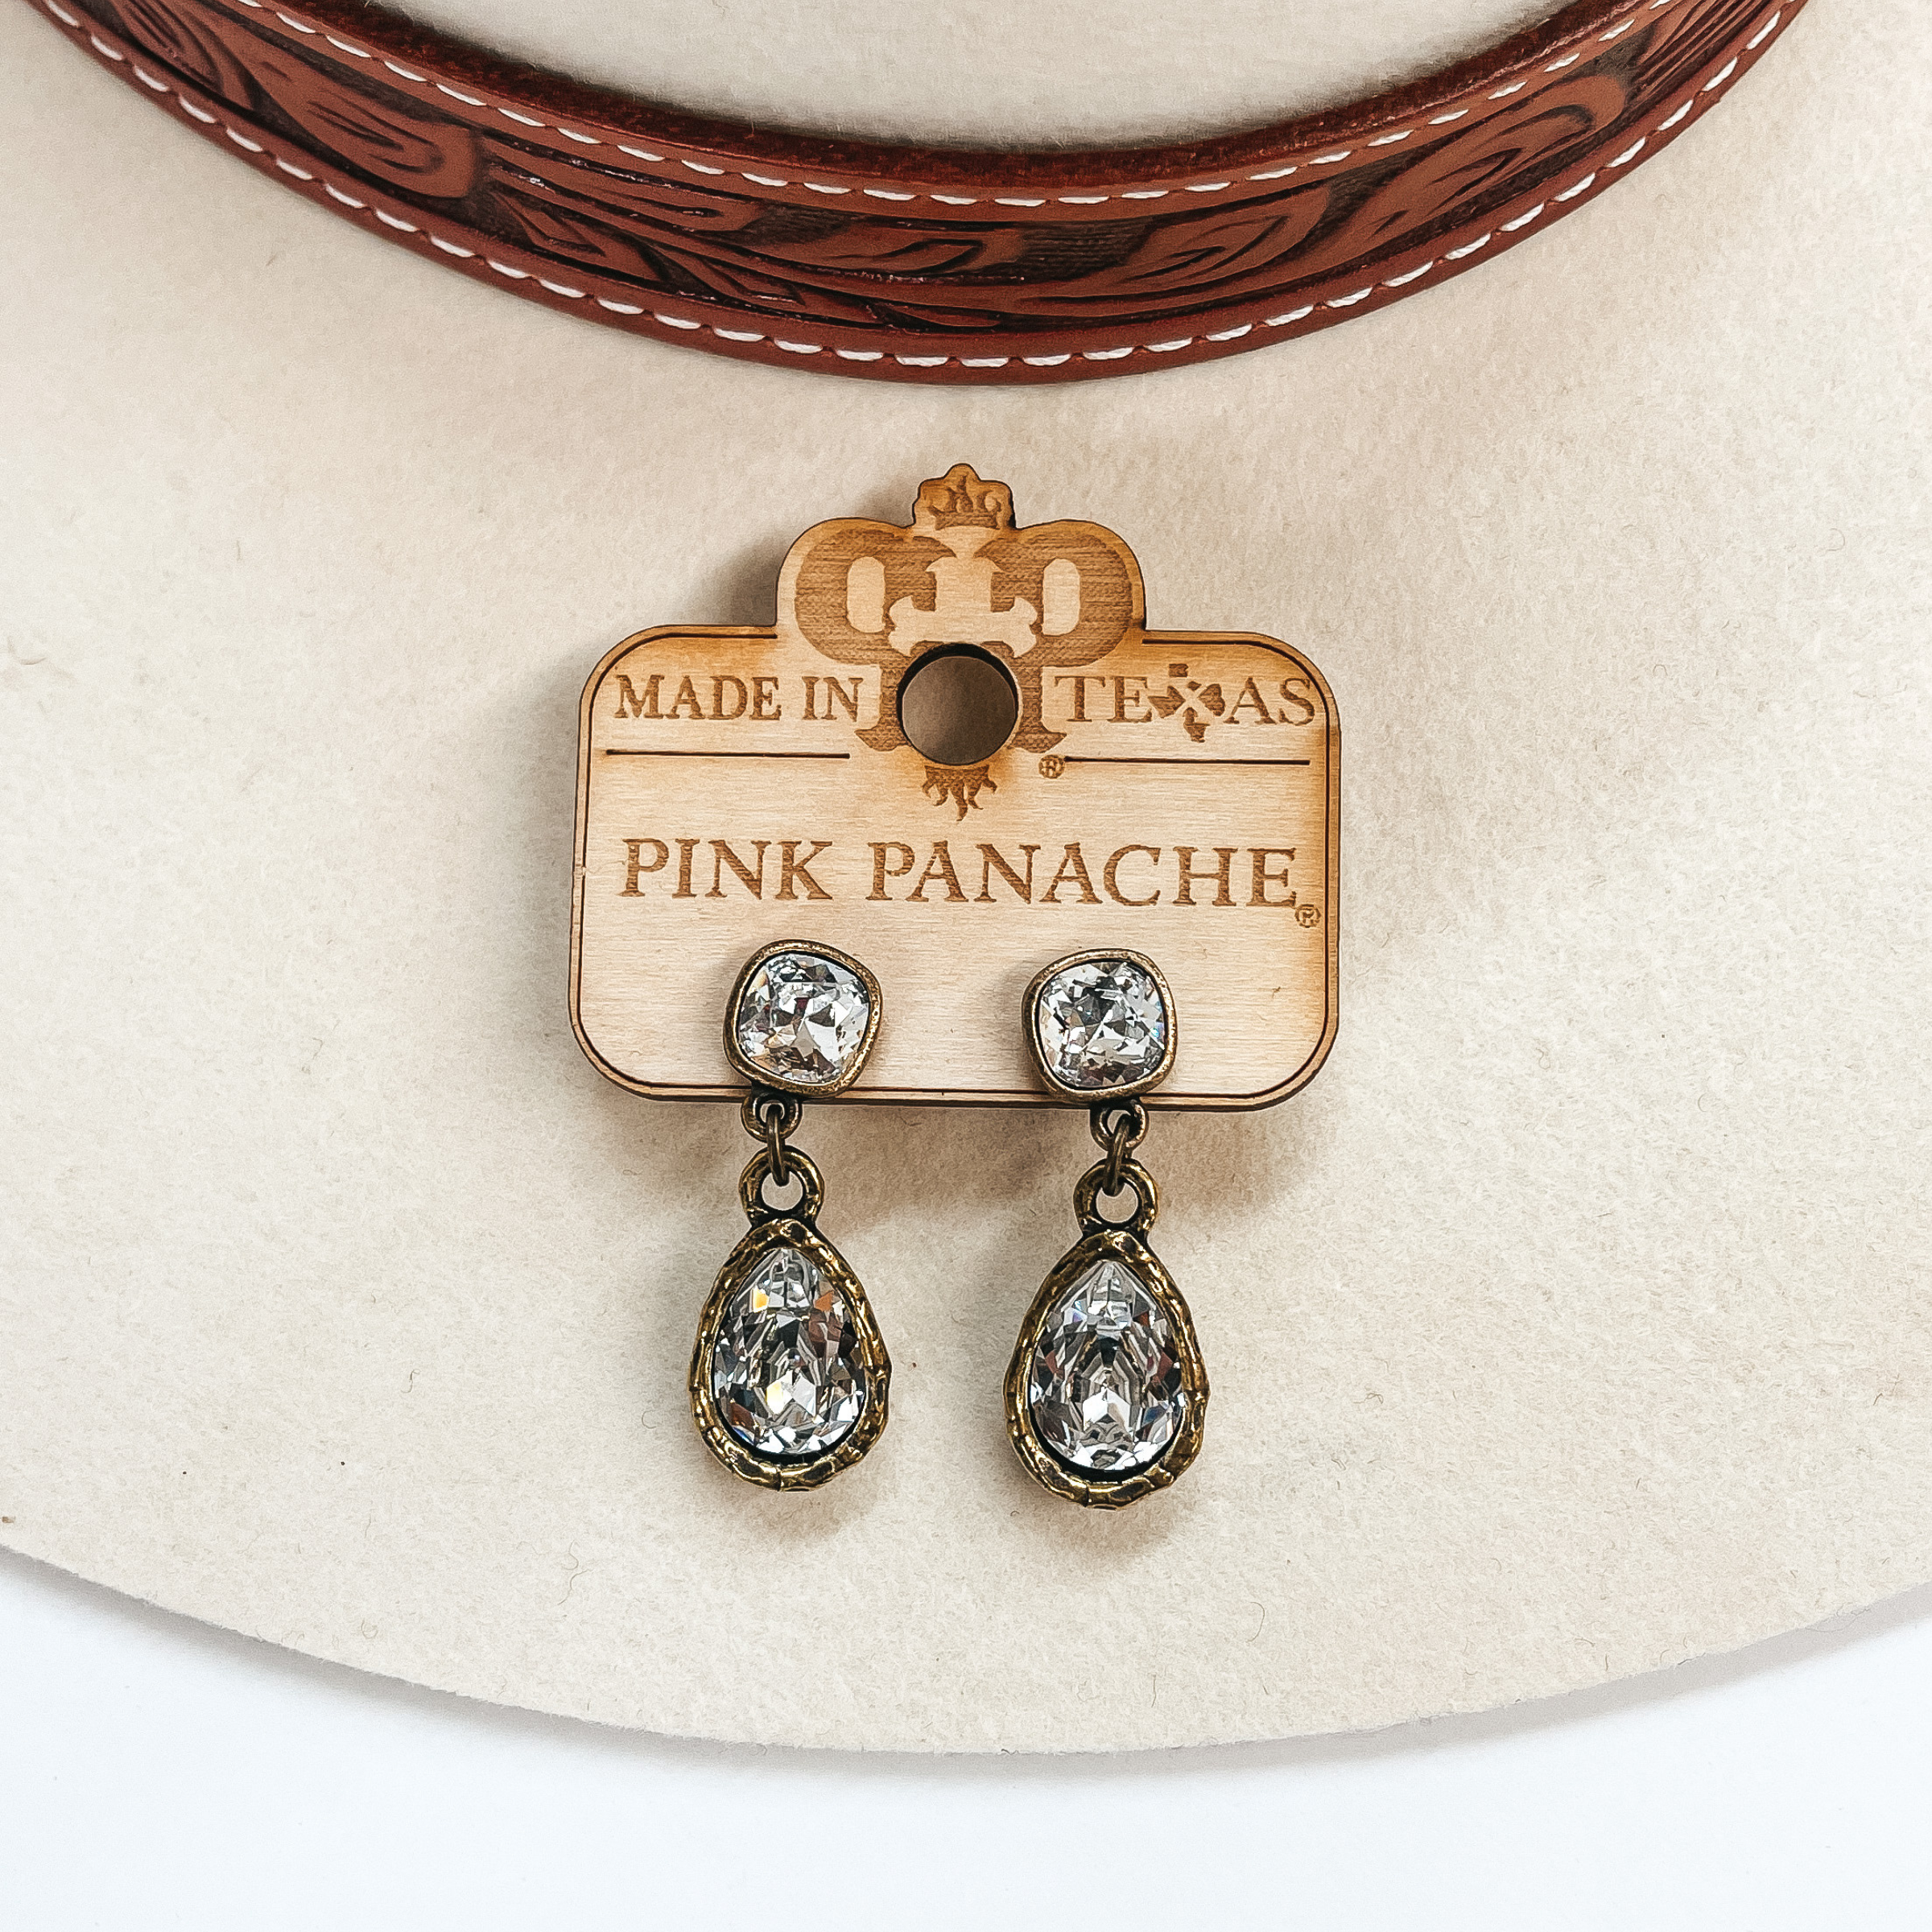 These are bronze post back earrings with a clear  cushion cut crystal connected to clear crystal  teardrop. Taken on an ivory hat and white background.